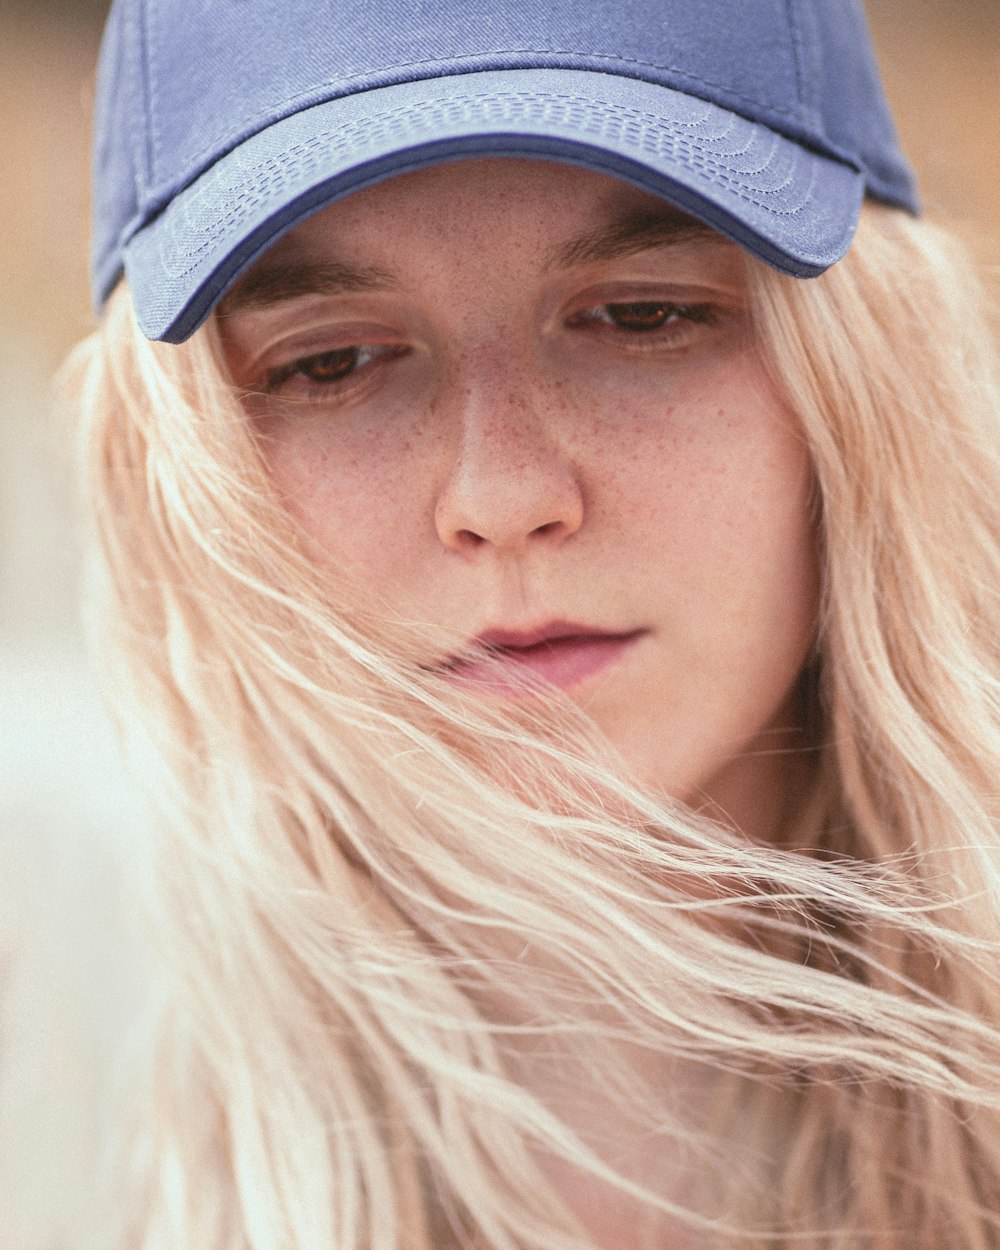 a woman with long blonde hair wearing a blue hat